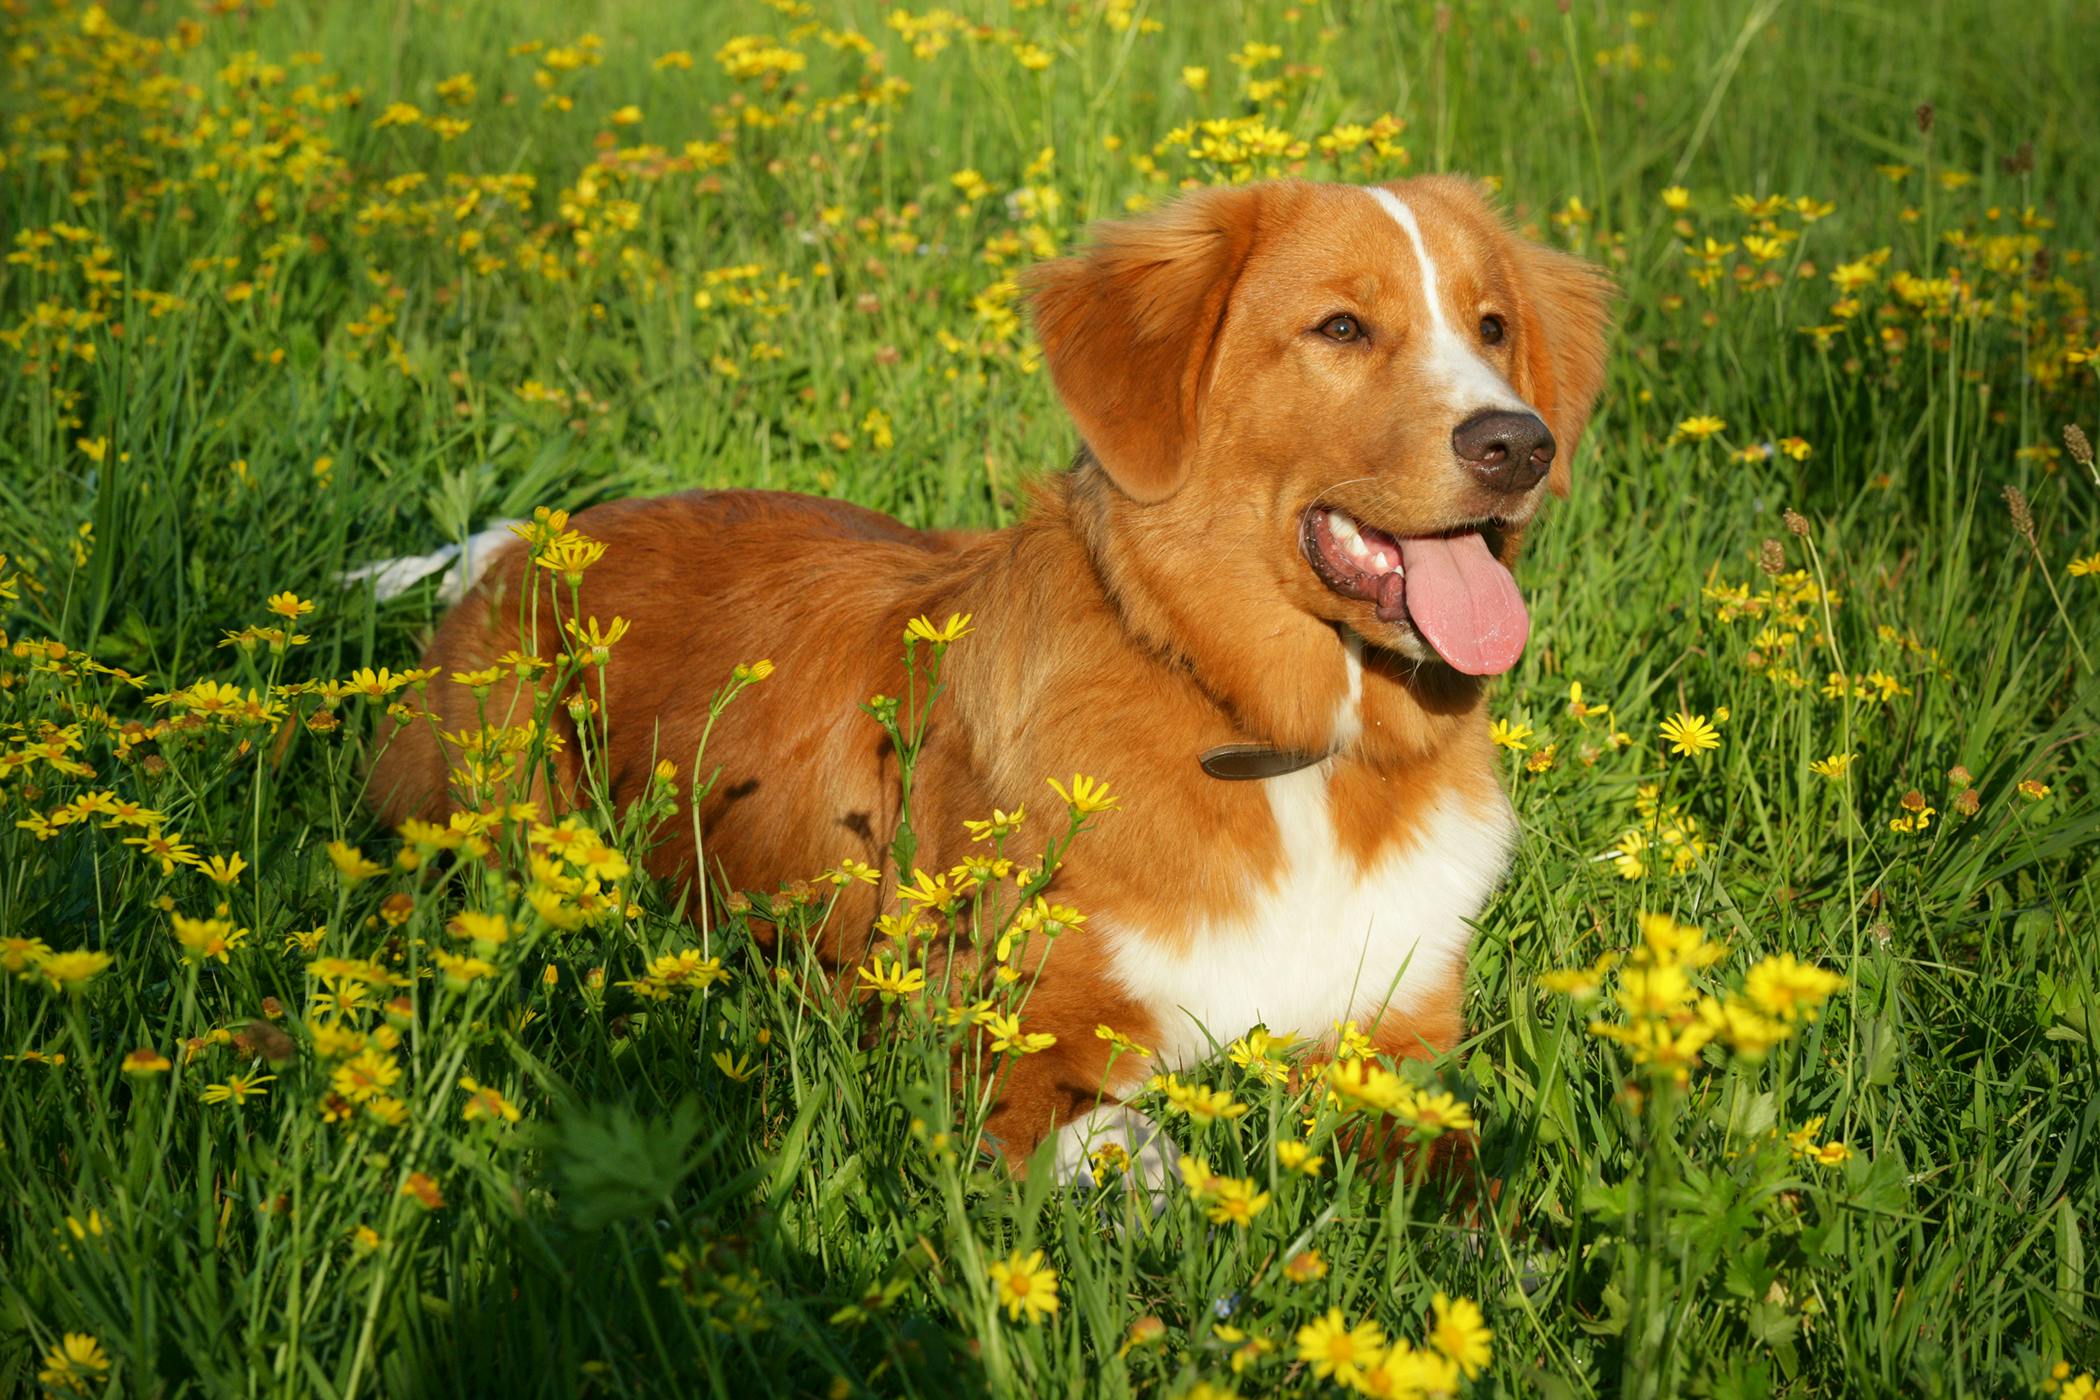 benadryl for swelling in dogs